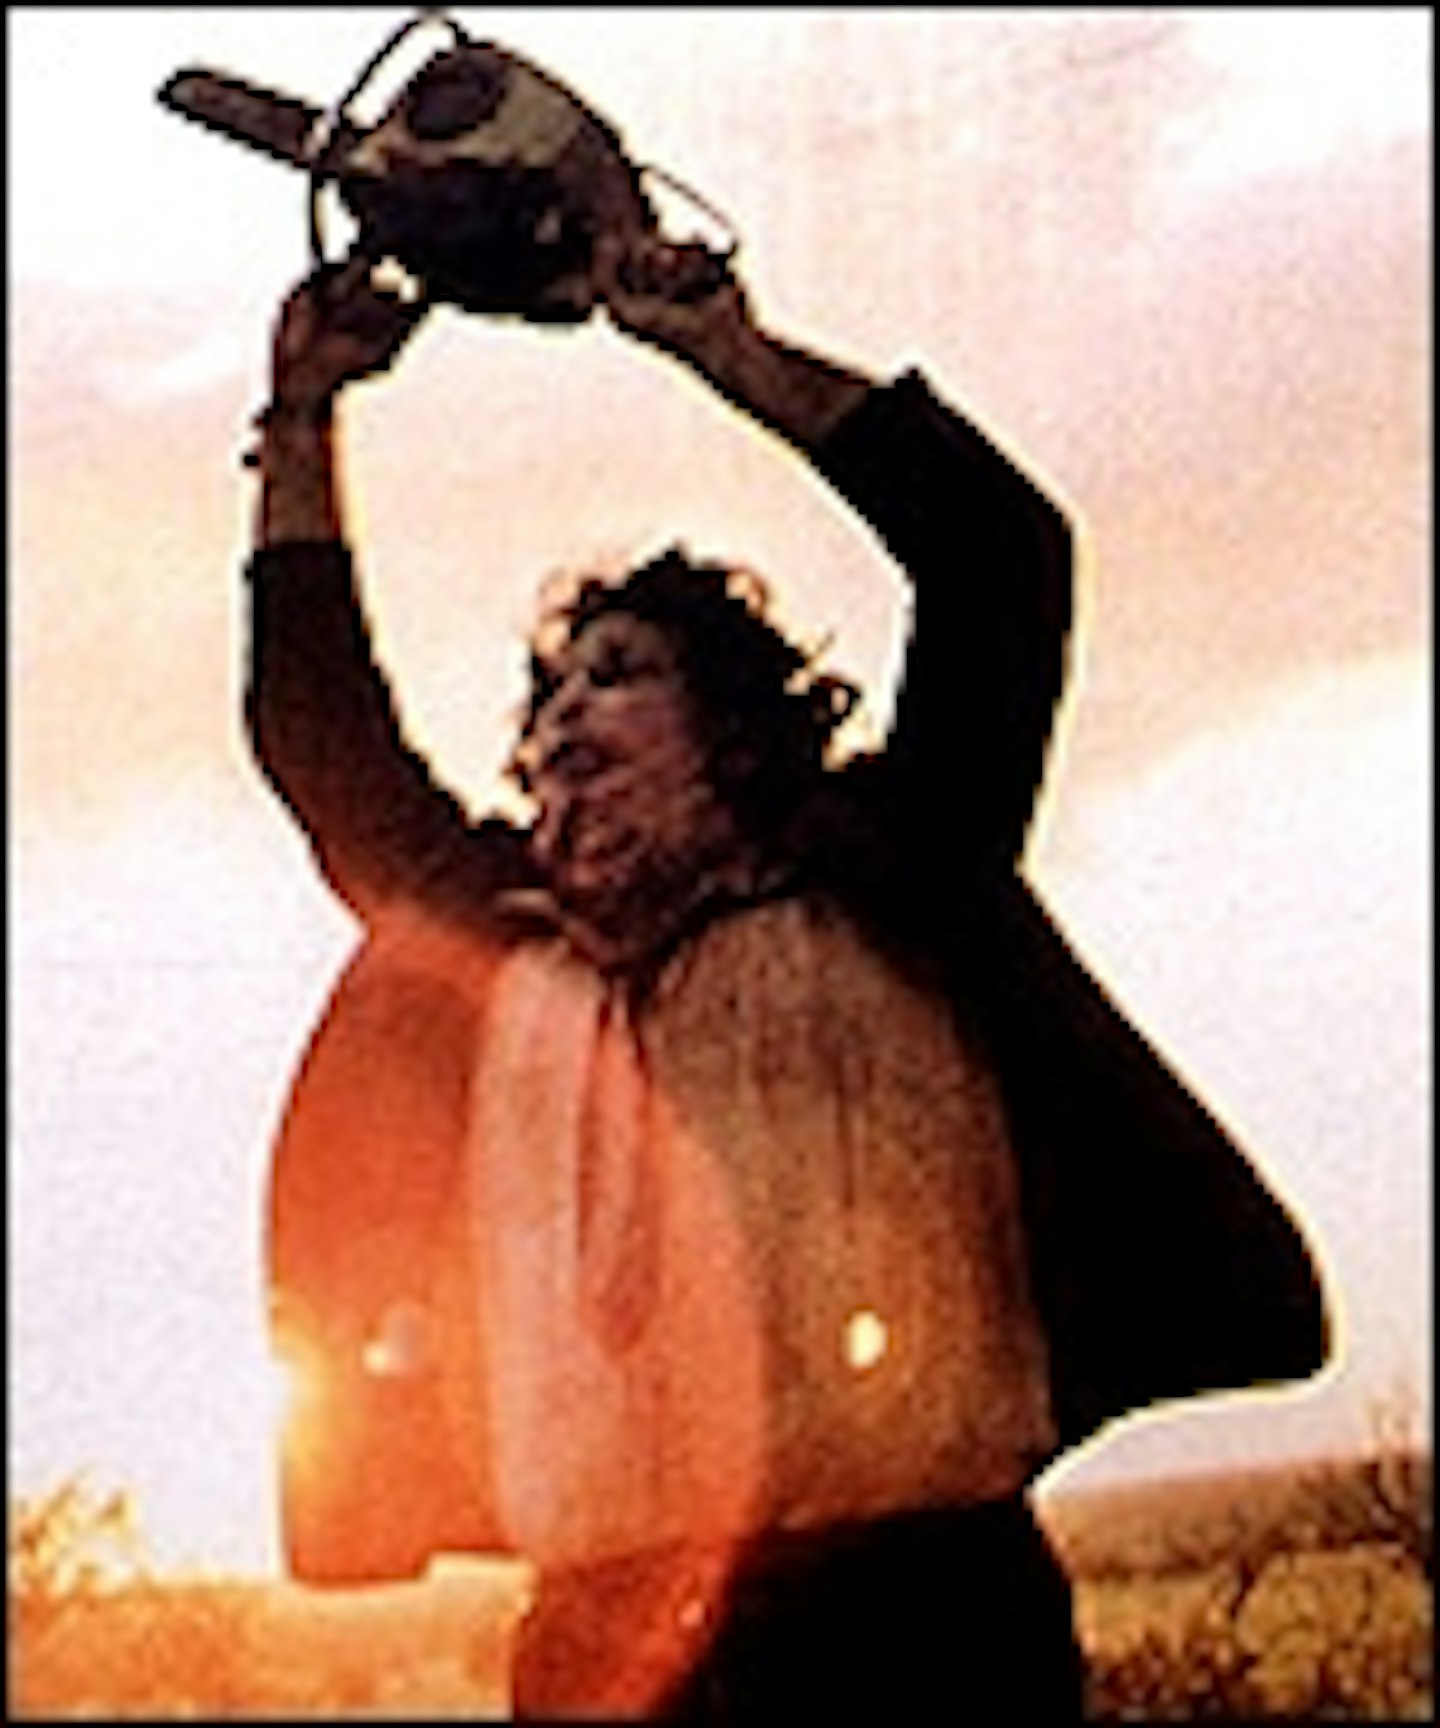 Leatherface Is On The Move